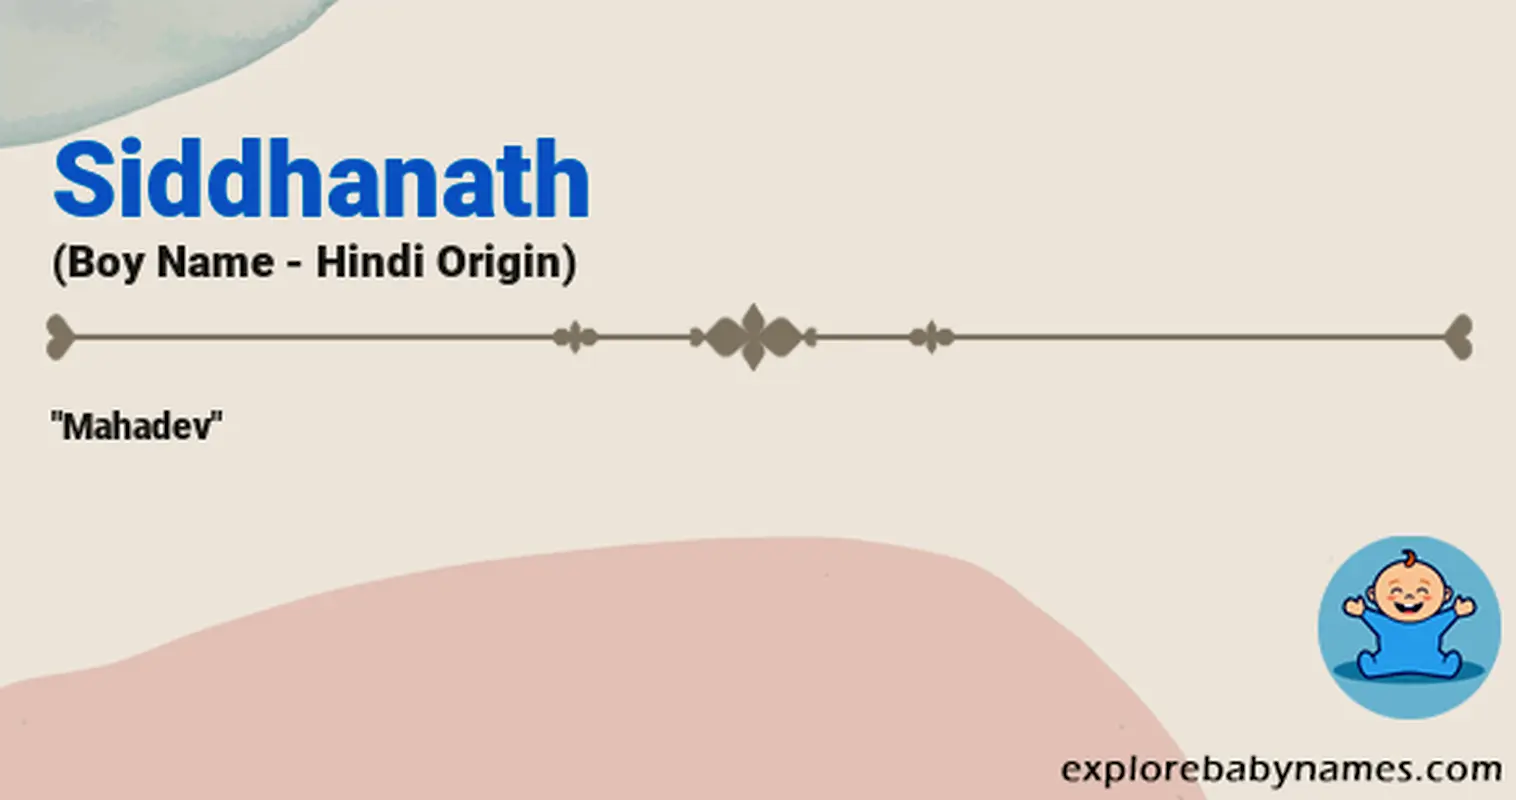 Meaning of Siddhanath